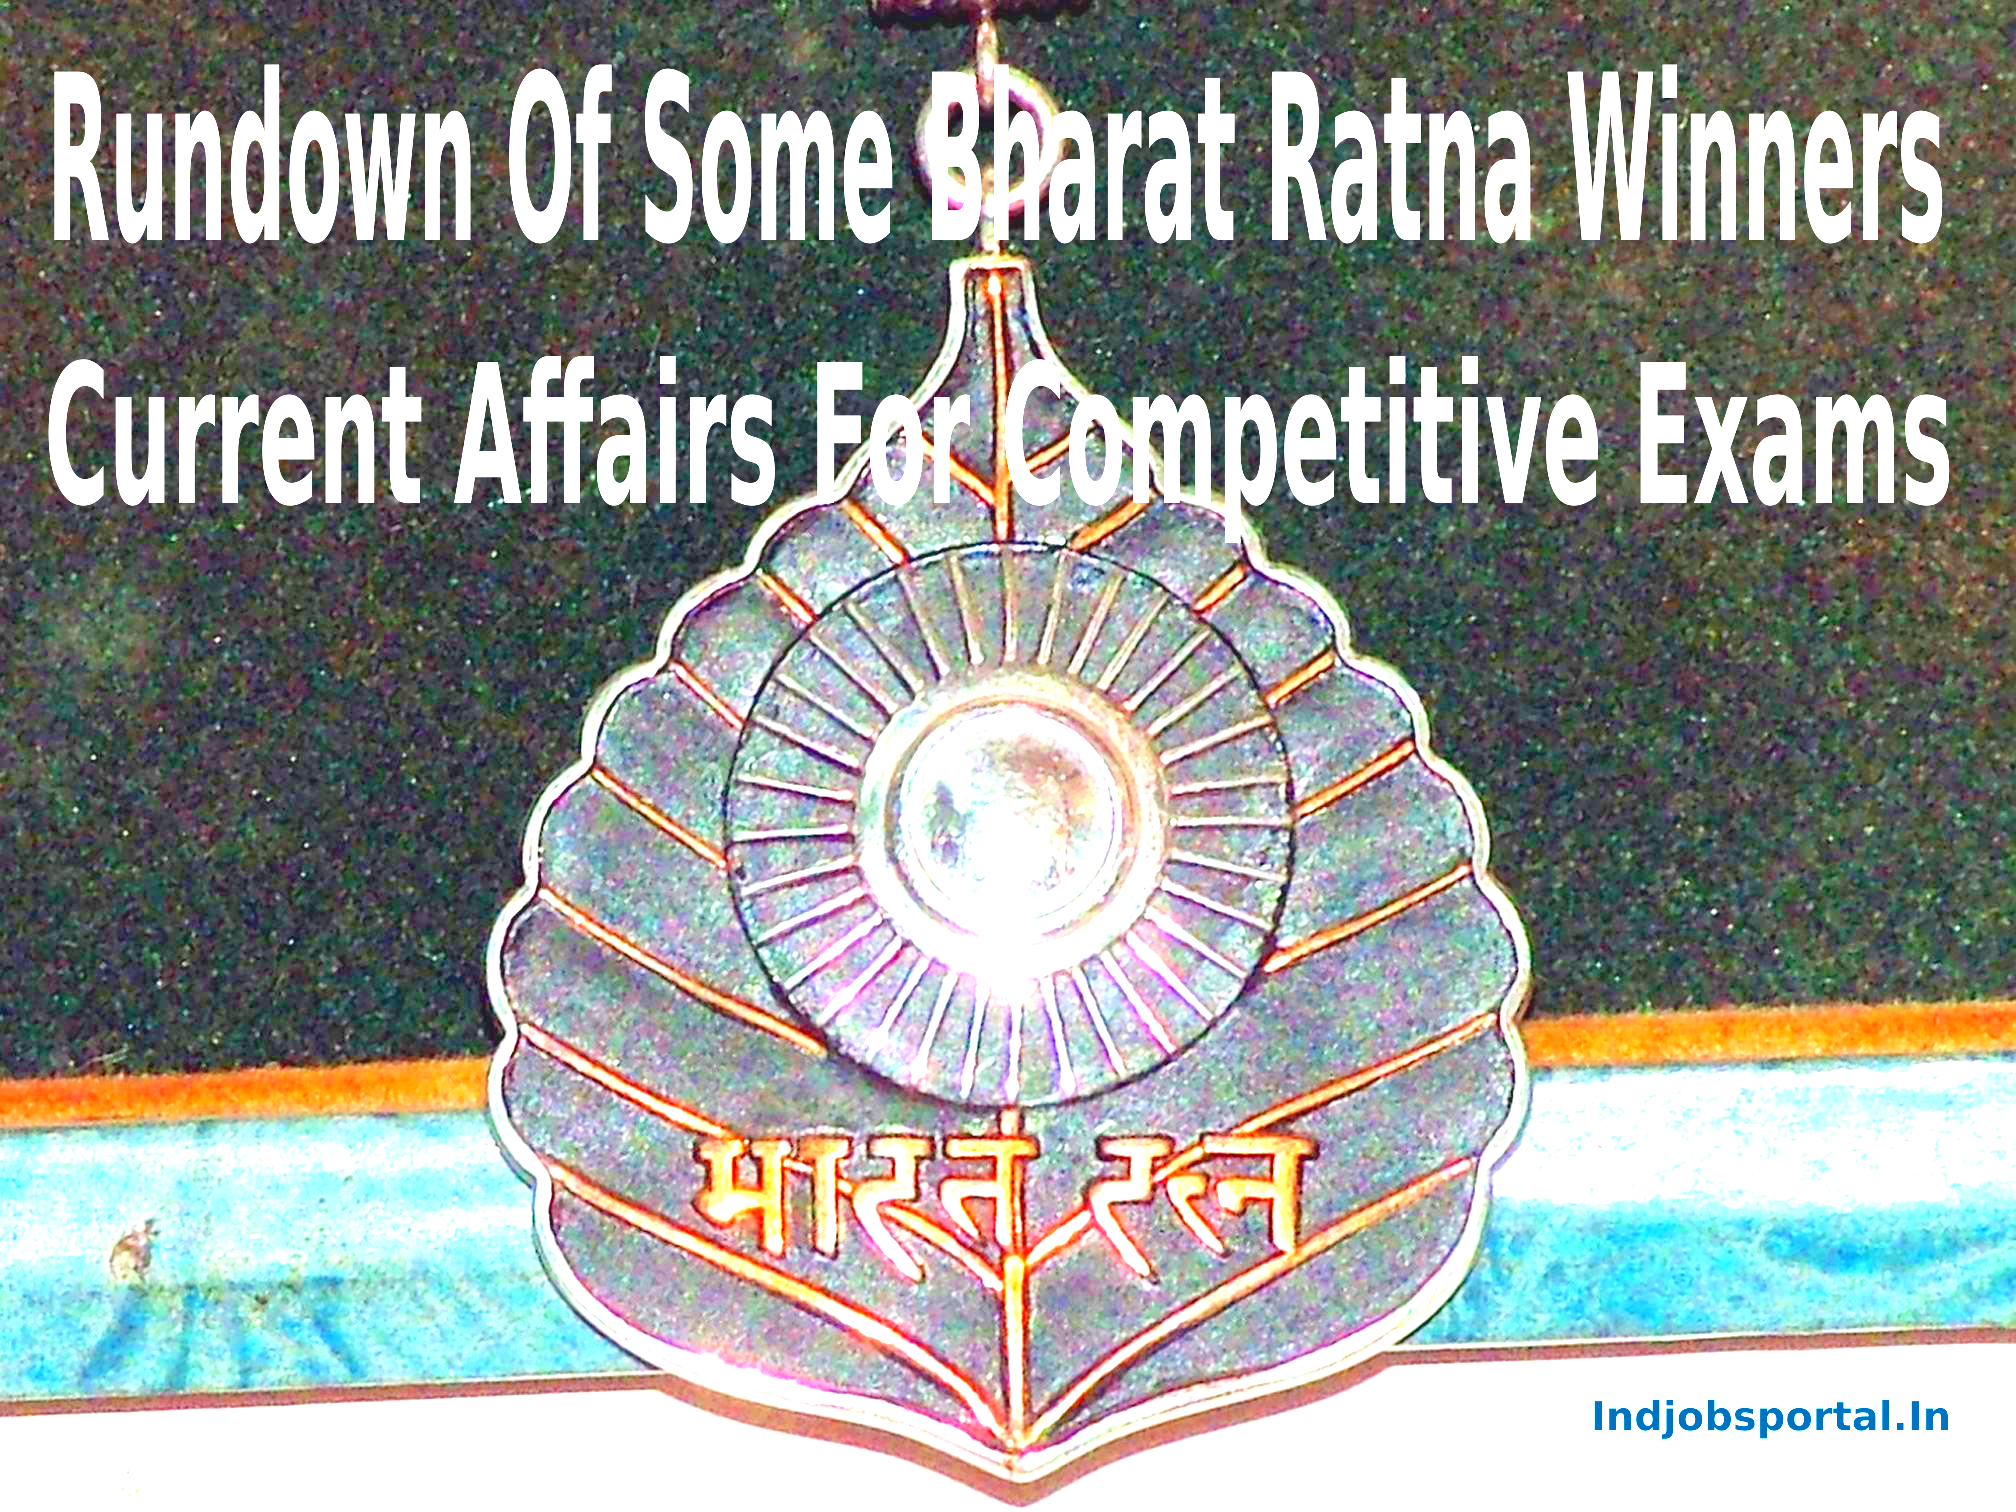 Rundown Of Some Bharat Ratna Winners: Current Affairs For Competitive ExamsRundown Of Some Bharat Ratna Winners: Current Affairs For Competitive Exams